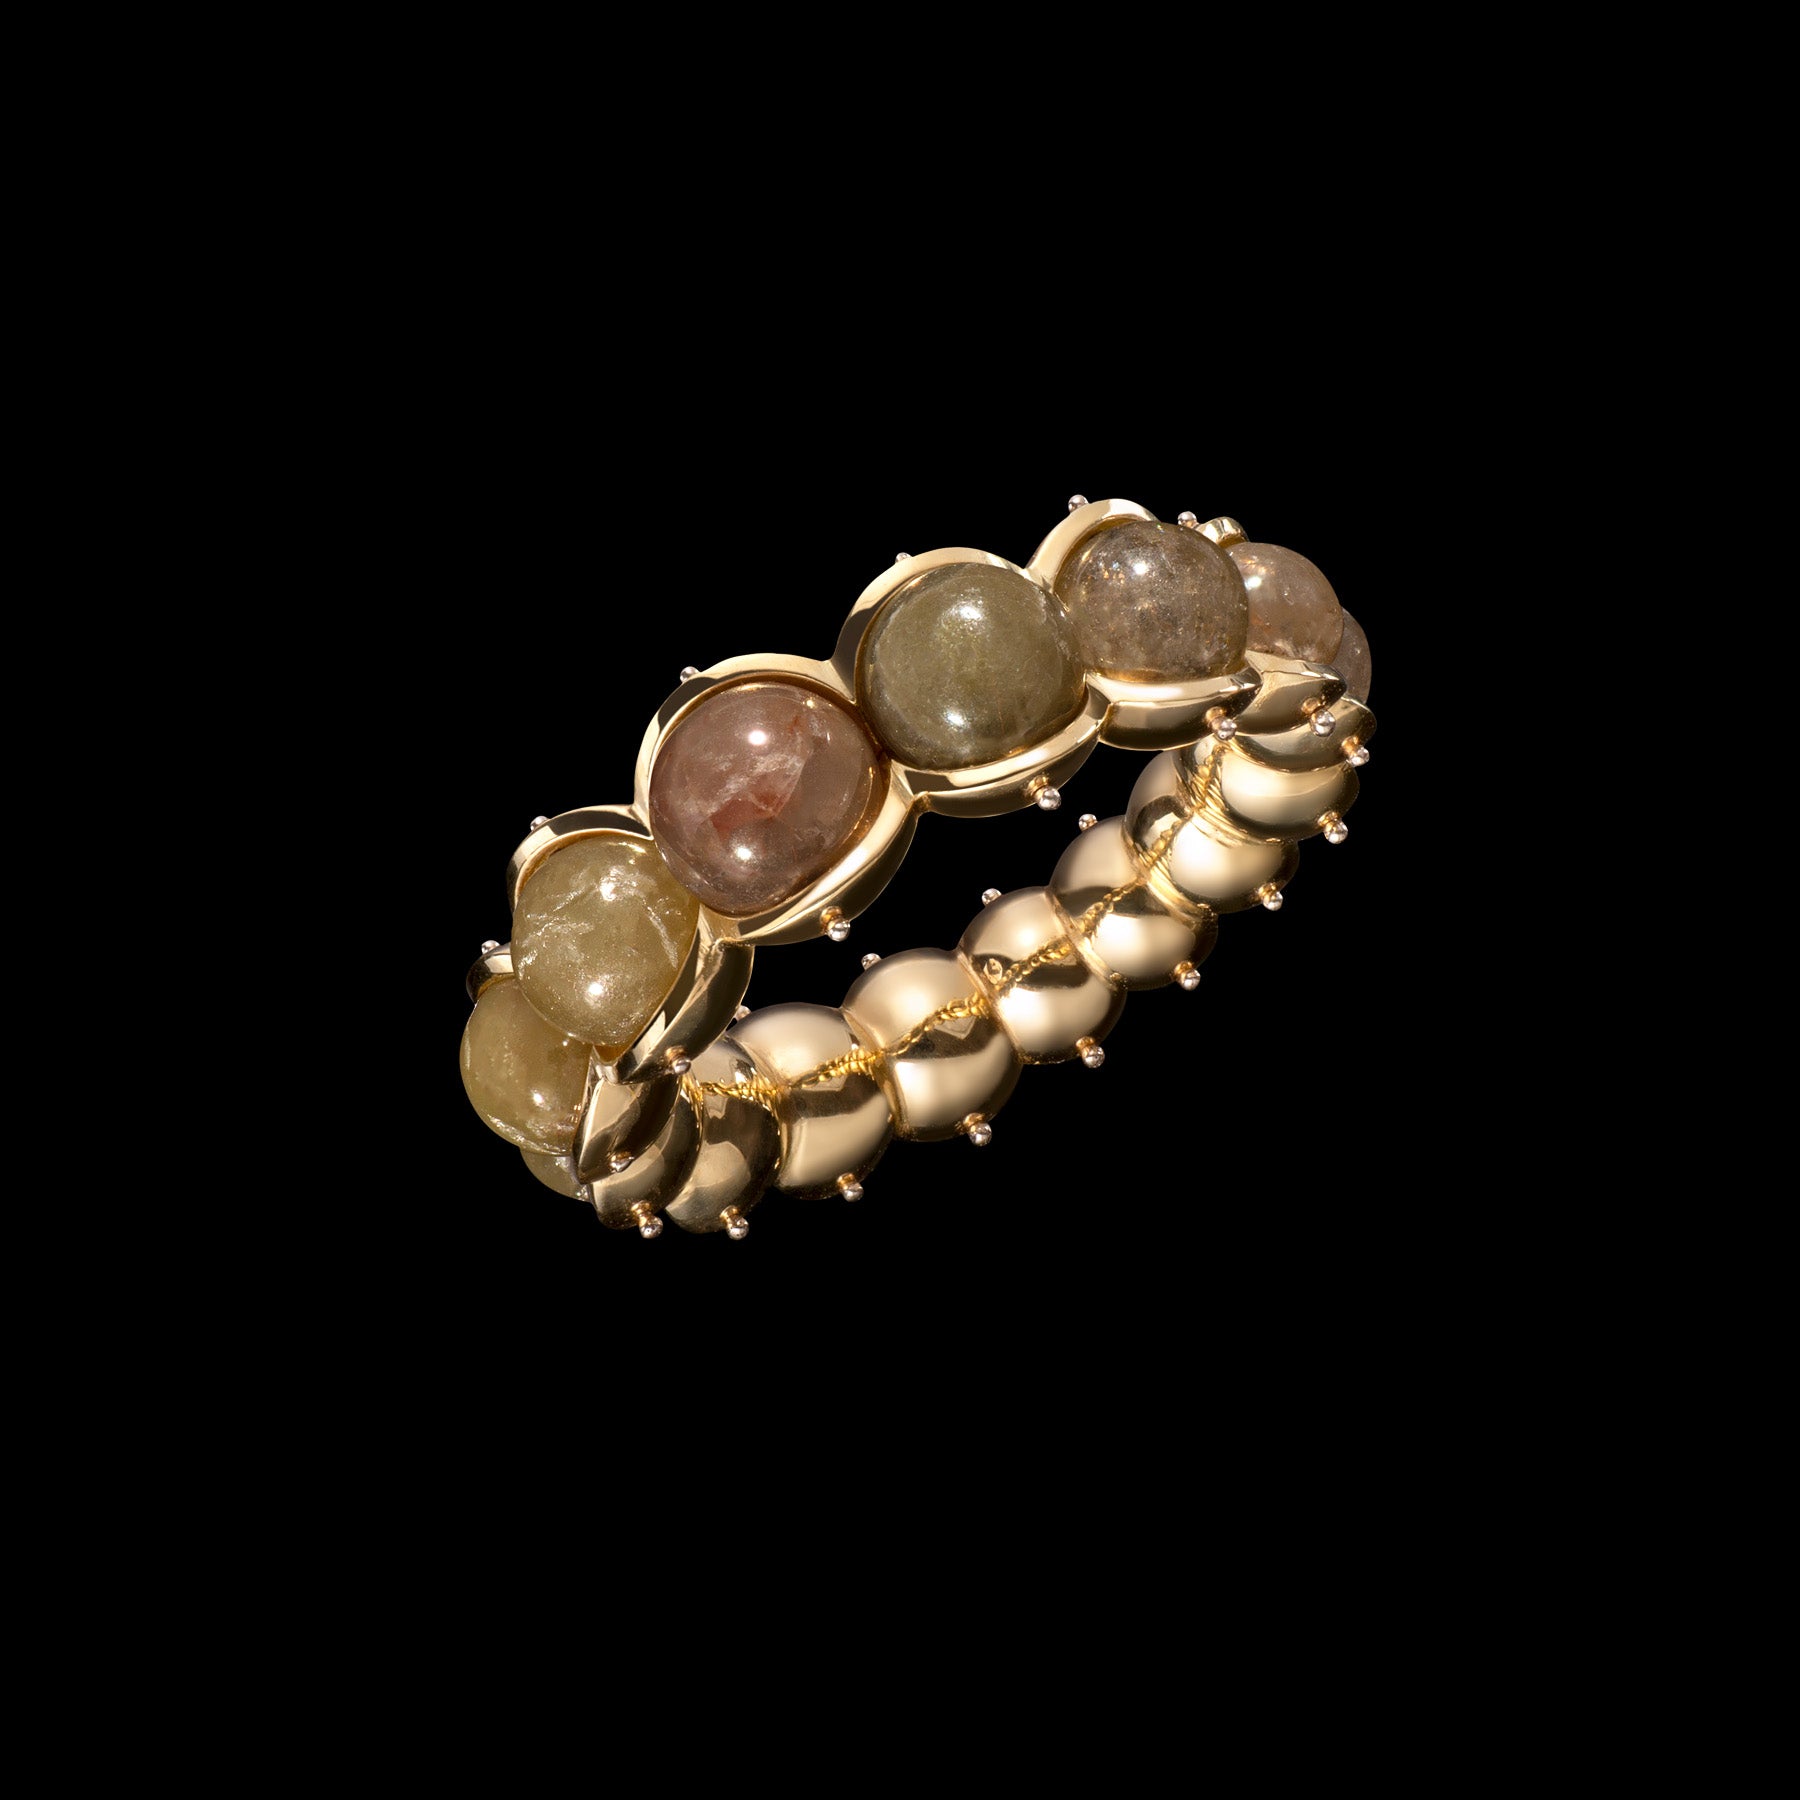 The Petrichor ring by designer Solange Azagury-Partridge - 18k Yellow Gold and Diamond Beads - front view 1